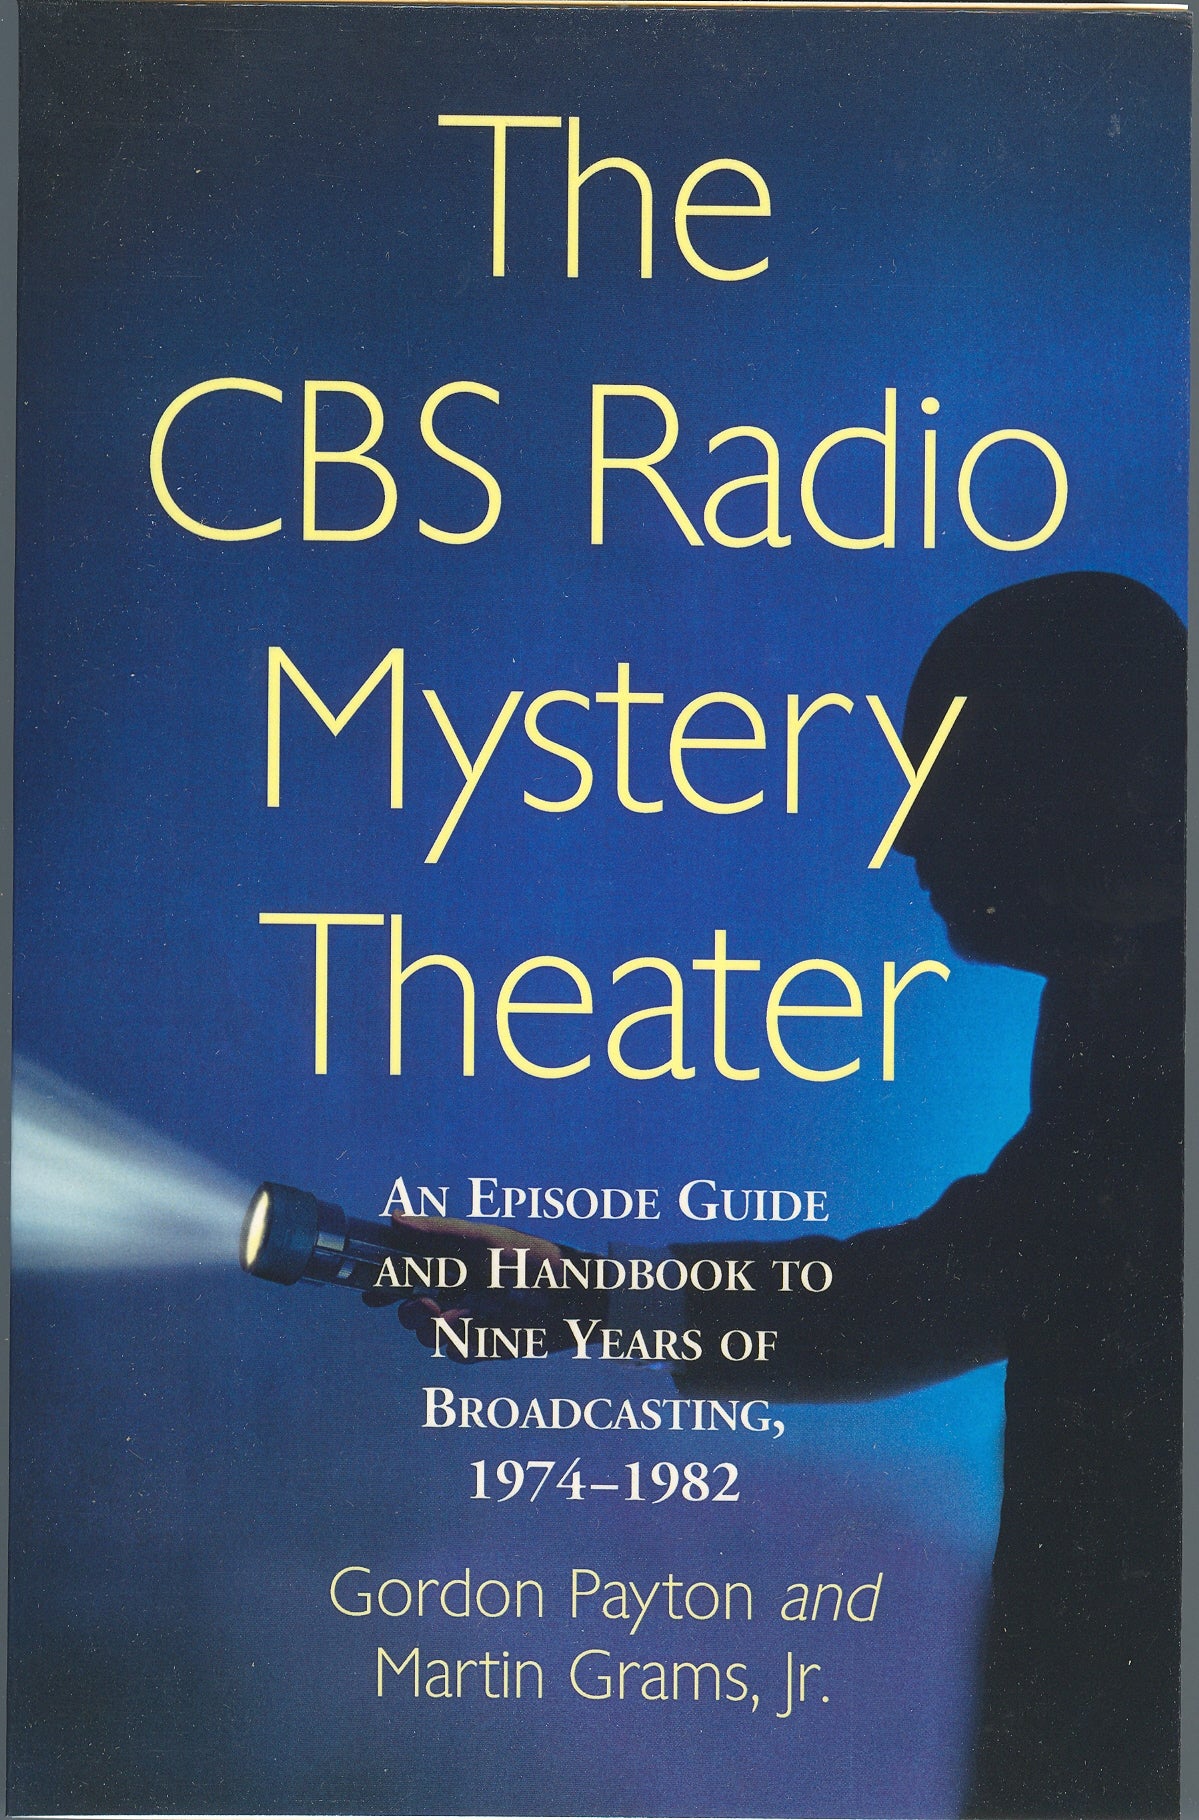 THE CBS RADIO MYSTERY THEATER: An Episode Guide and Handbook, 1974-1982